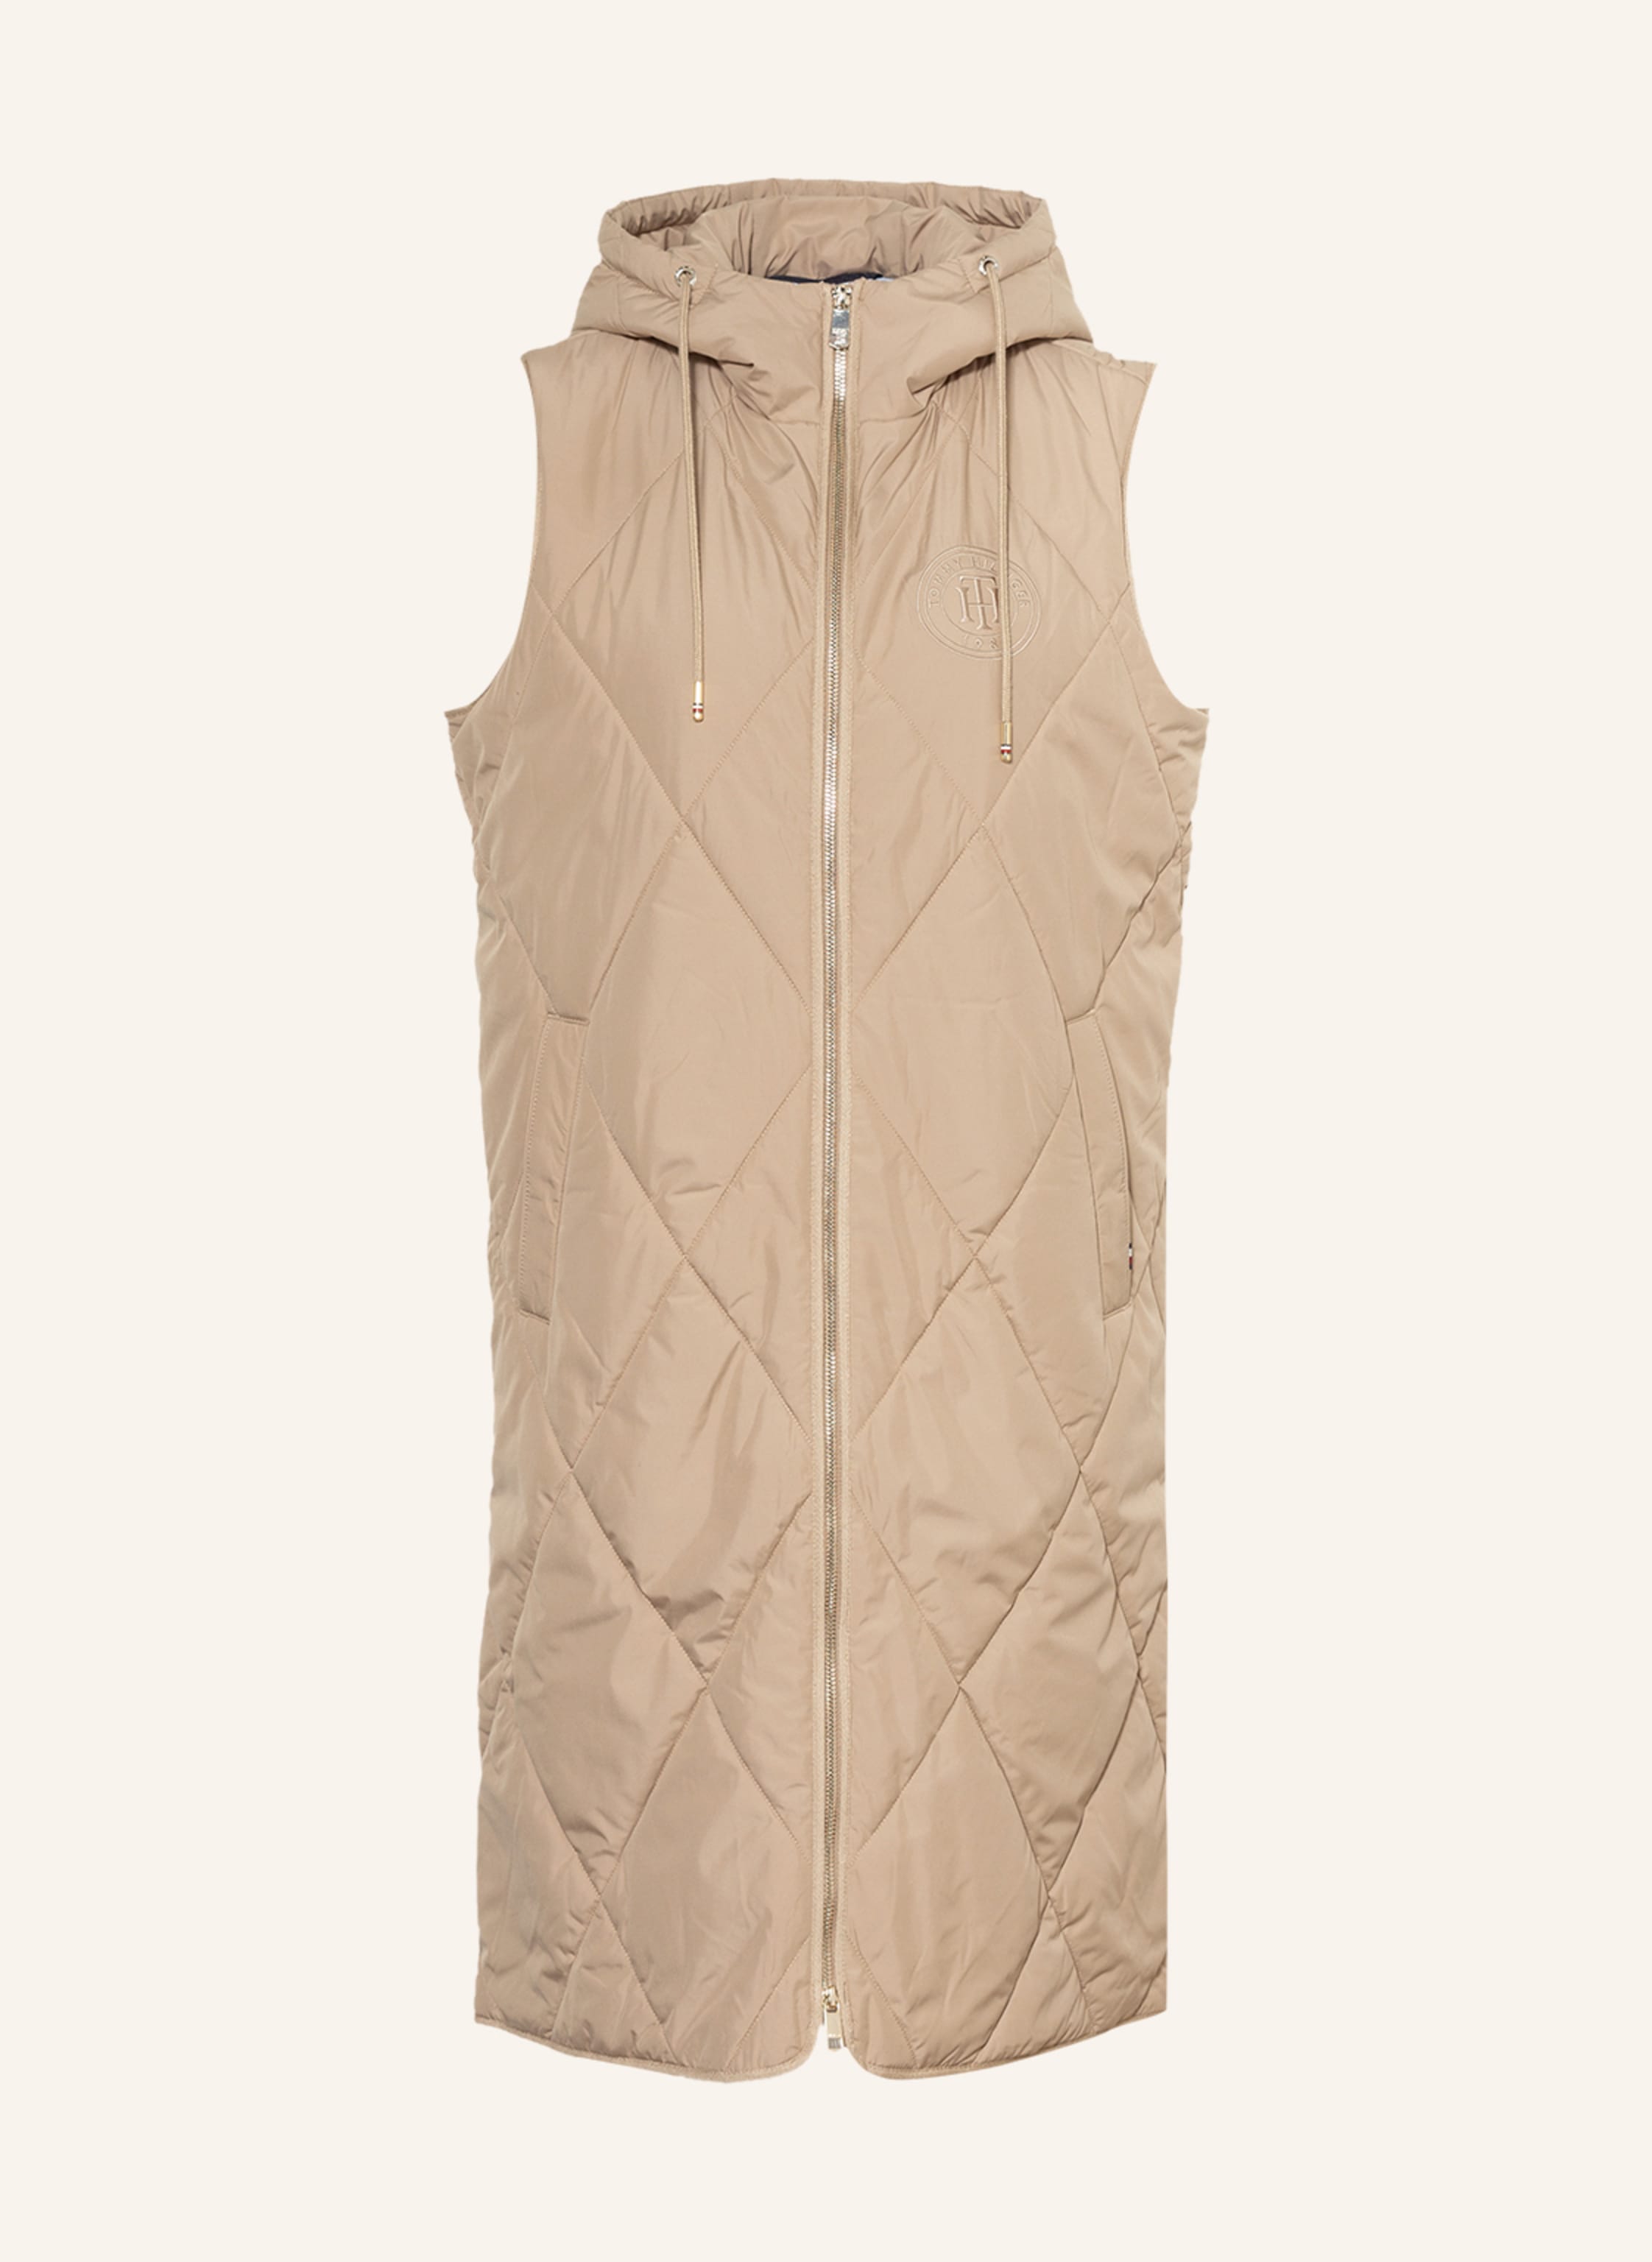 TOMMY HILFIGER Quilted vest with SORONA®AURA insulation in beige